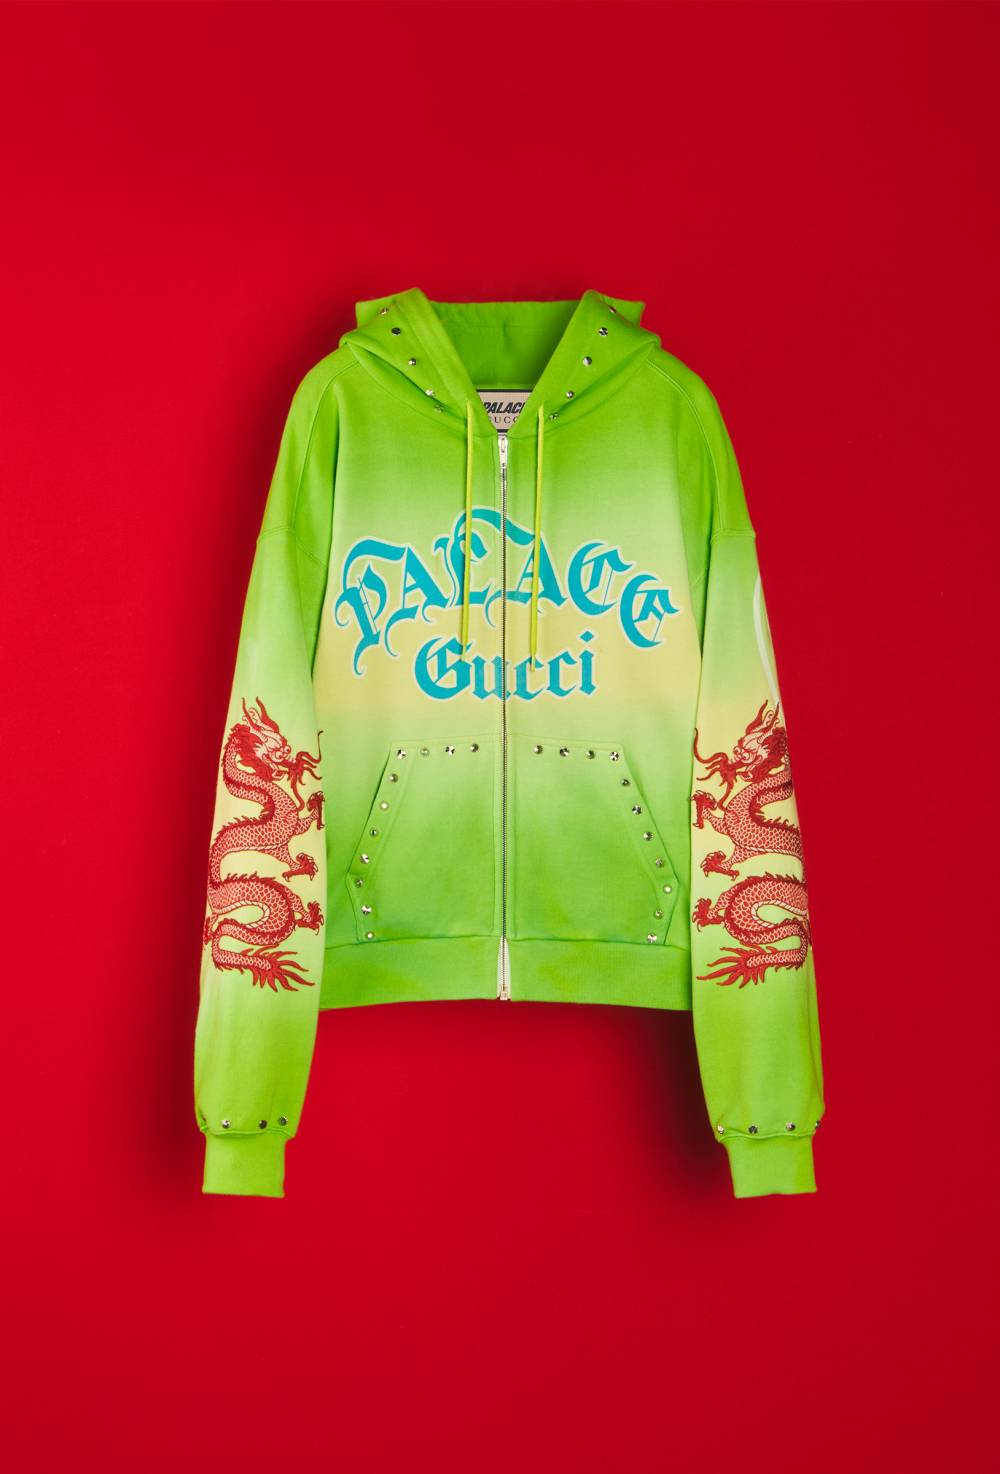 Studded and embroidered tie-dye sweatshirt by Palace Gucci image #1